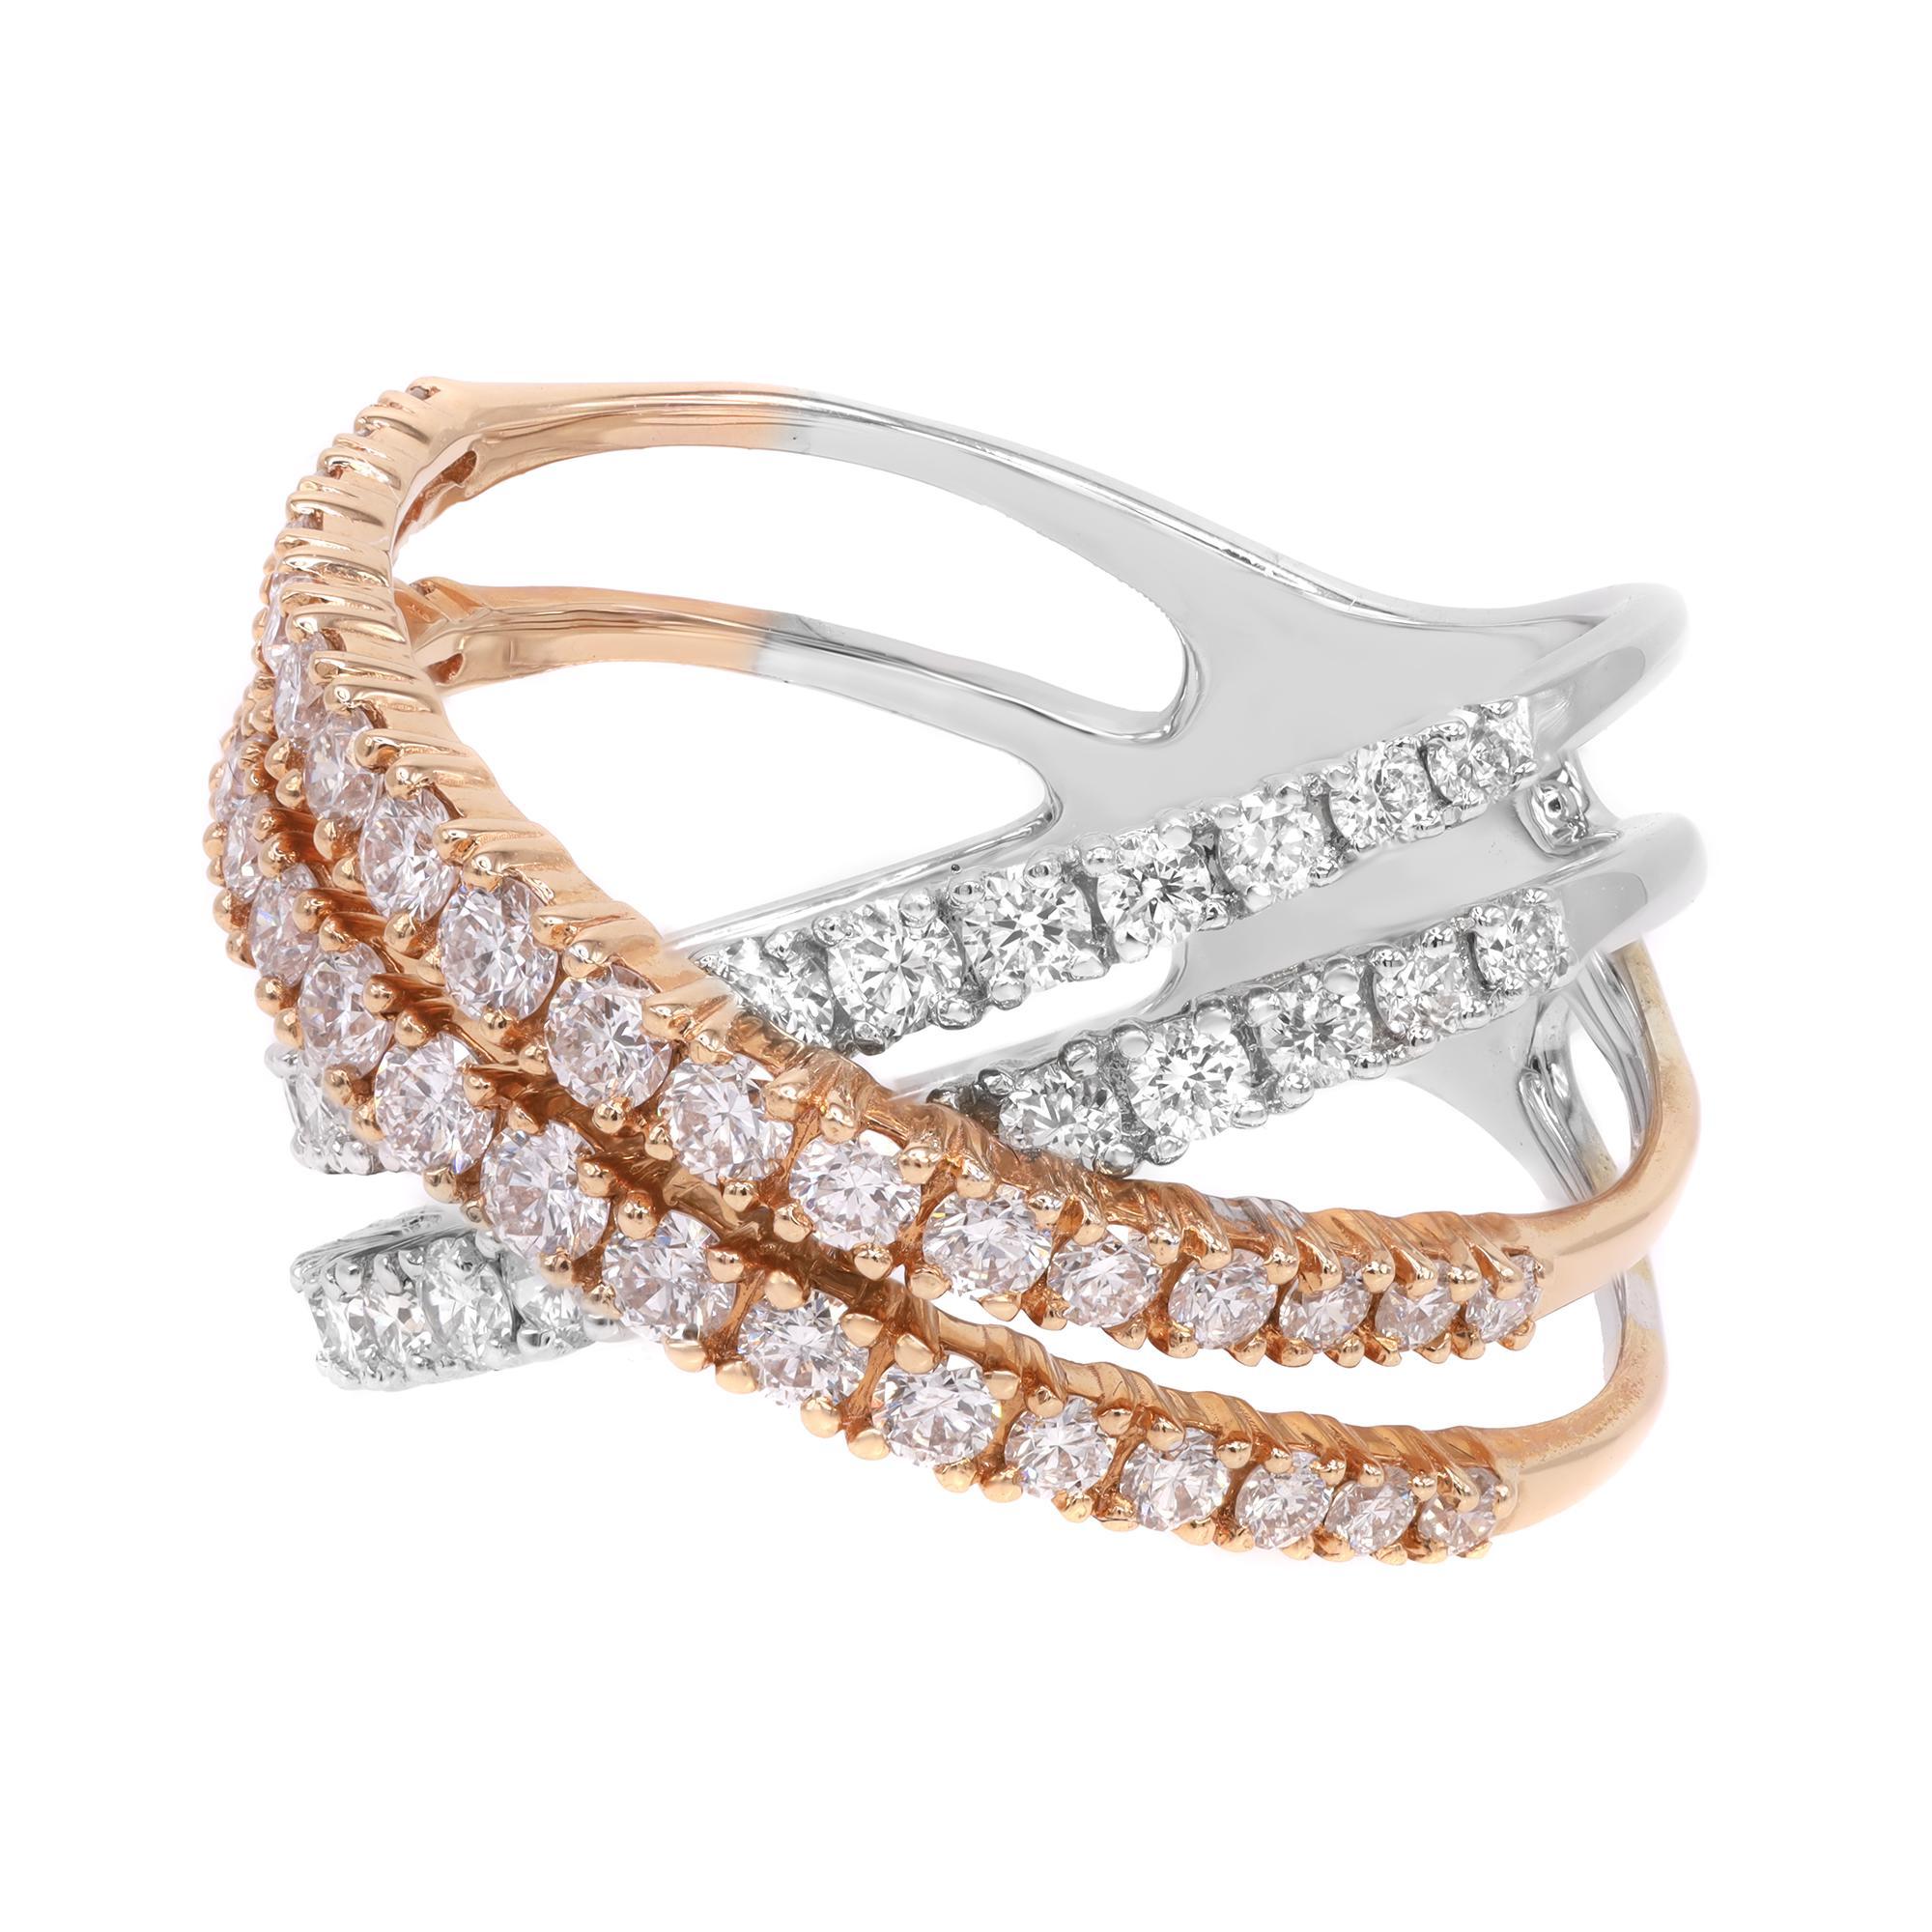 Presenting a luxury and bold two tone crisscross design natural diamond ring crafted in 18k rose gold and white gold. This fancy ring is highlighted with 1.96 cttw of dazzling white round cut diamonds with G-H color and VS-SI clarity. Ring size is